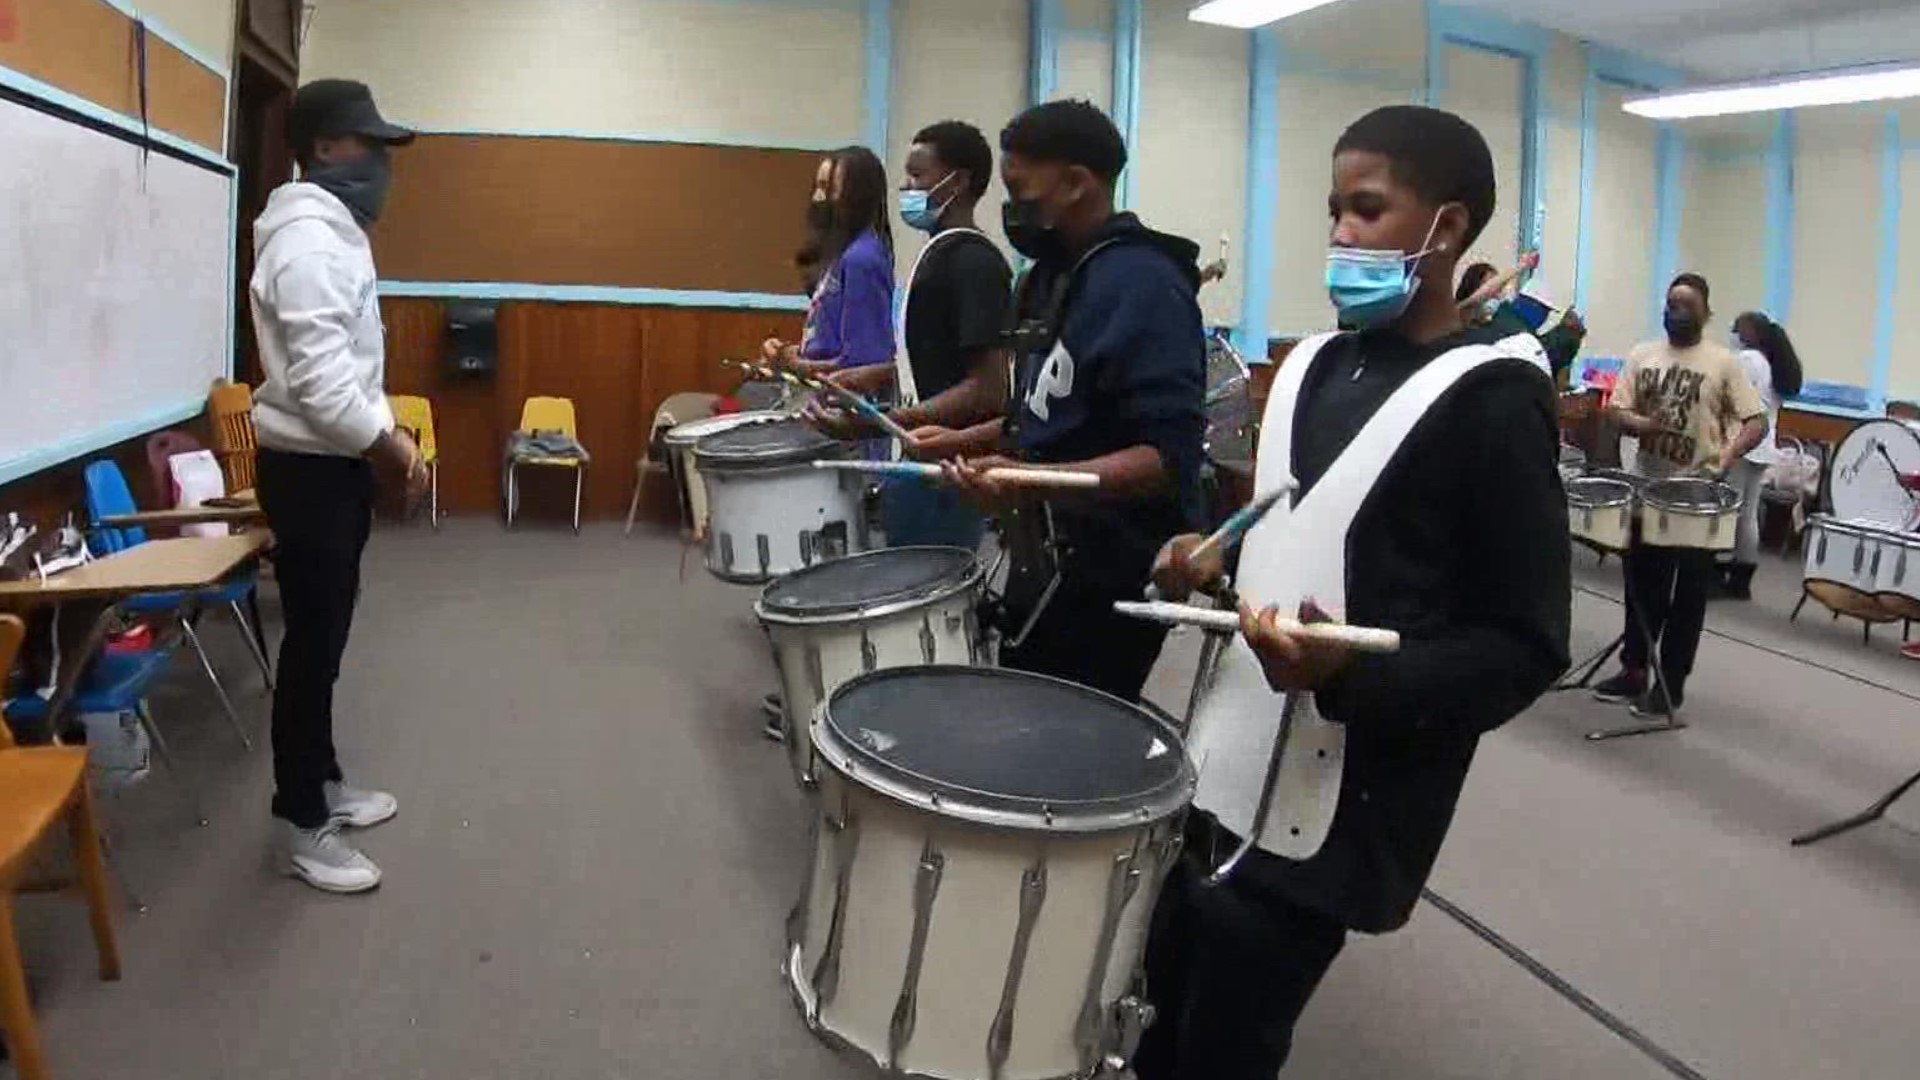 My5tery Music is made up of a drumline and step team with the goal of teaching youth about music and leading them on a positive path in life.